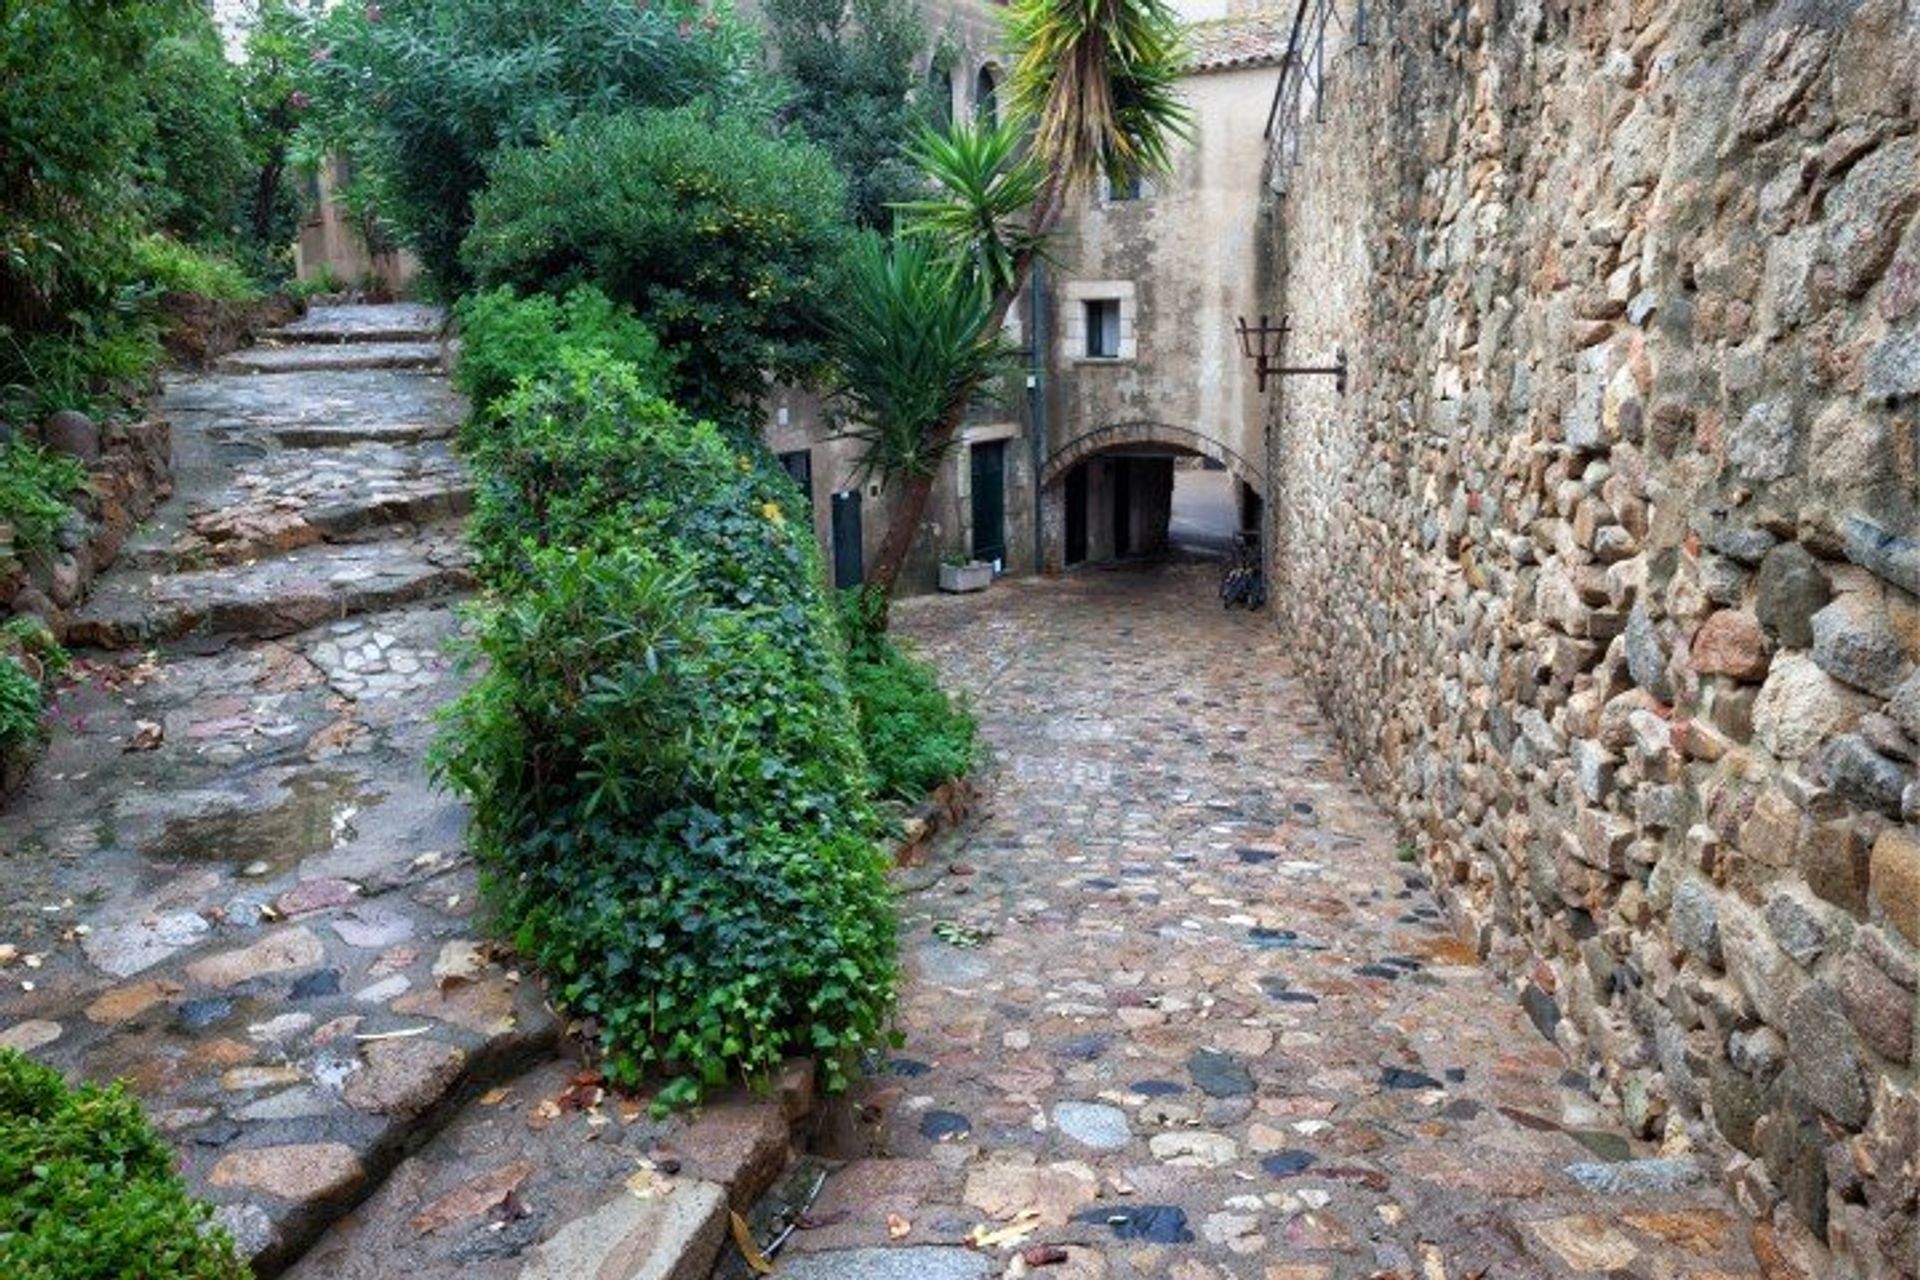 The cobbled streets and medieval walls of the old town Vila Vella